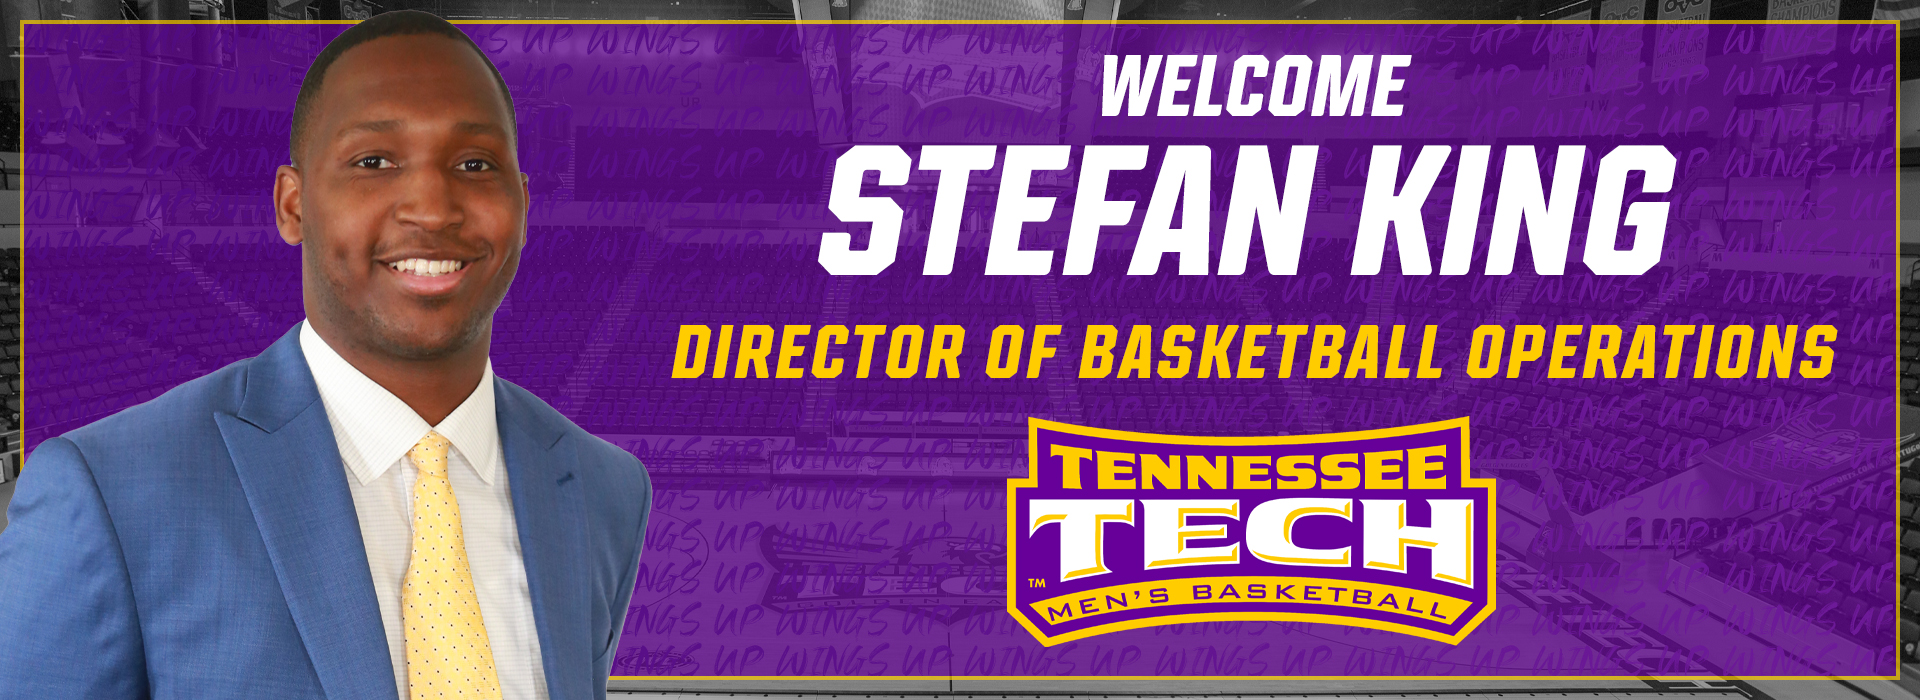 King joins Tech men's basketball staff as director of operations